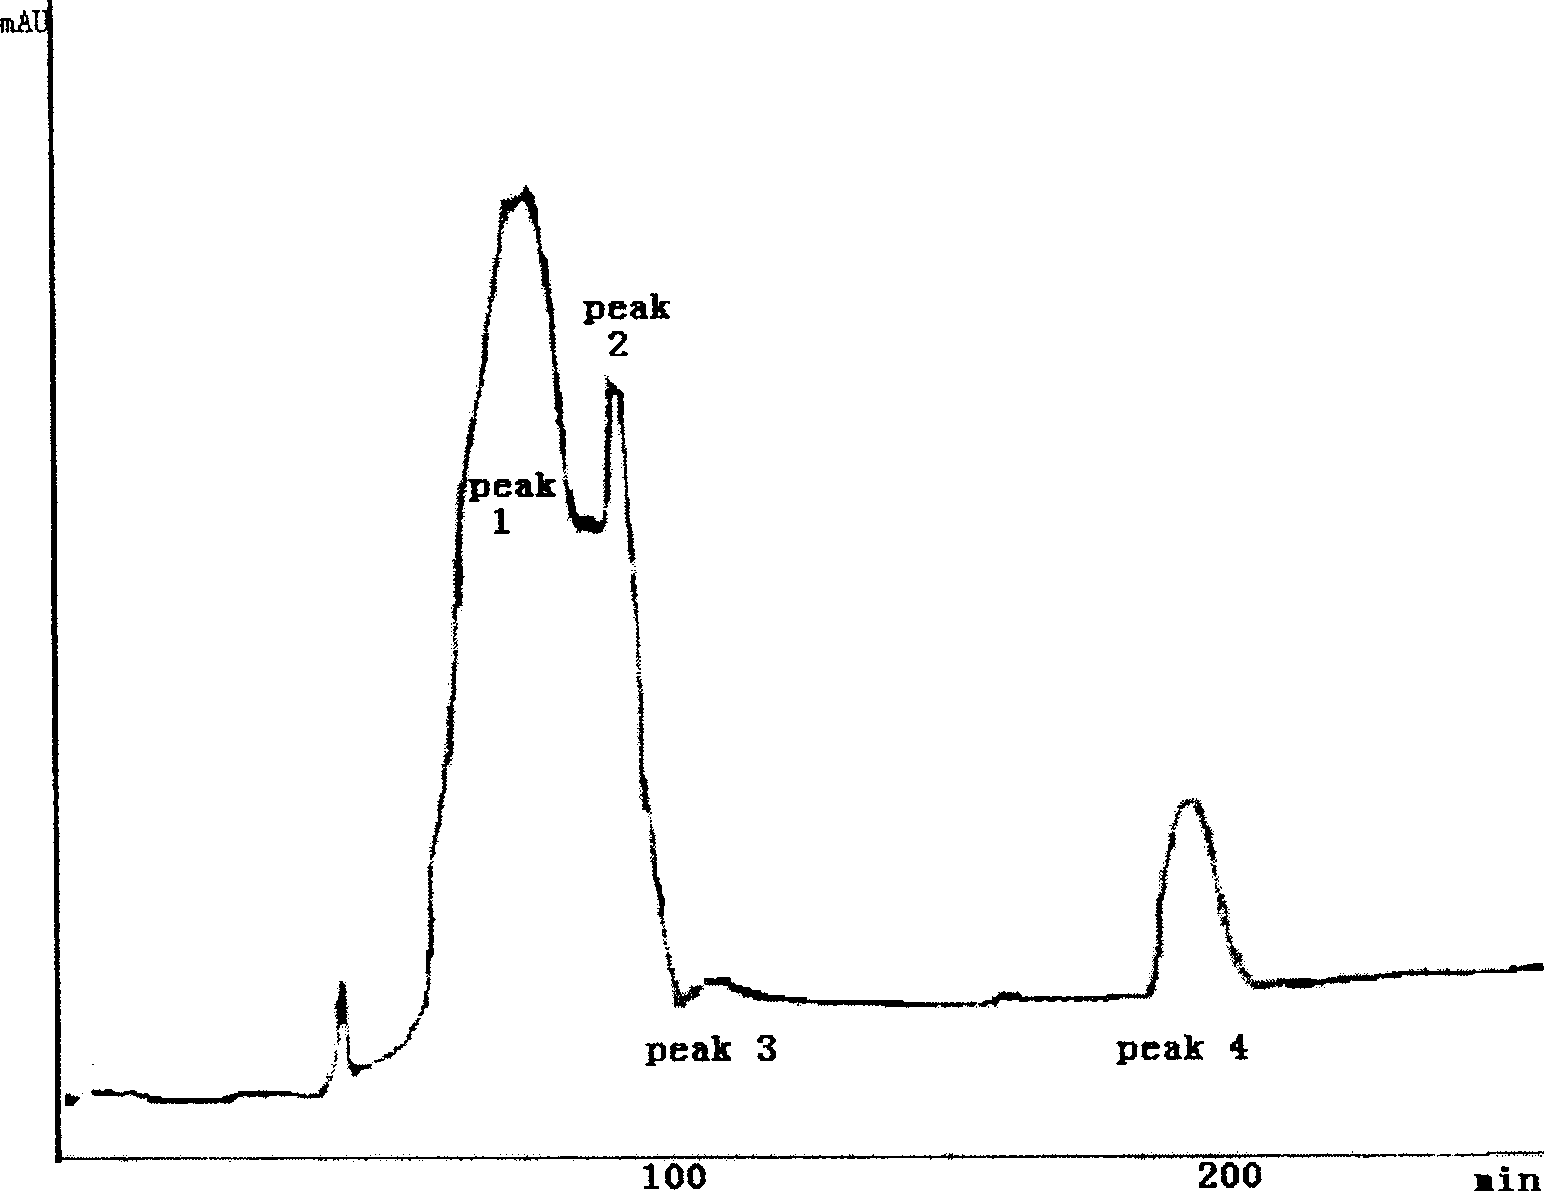 Production of high-purity peiminine and fritimine